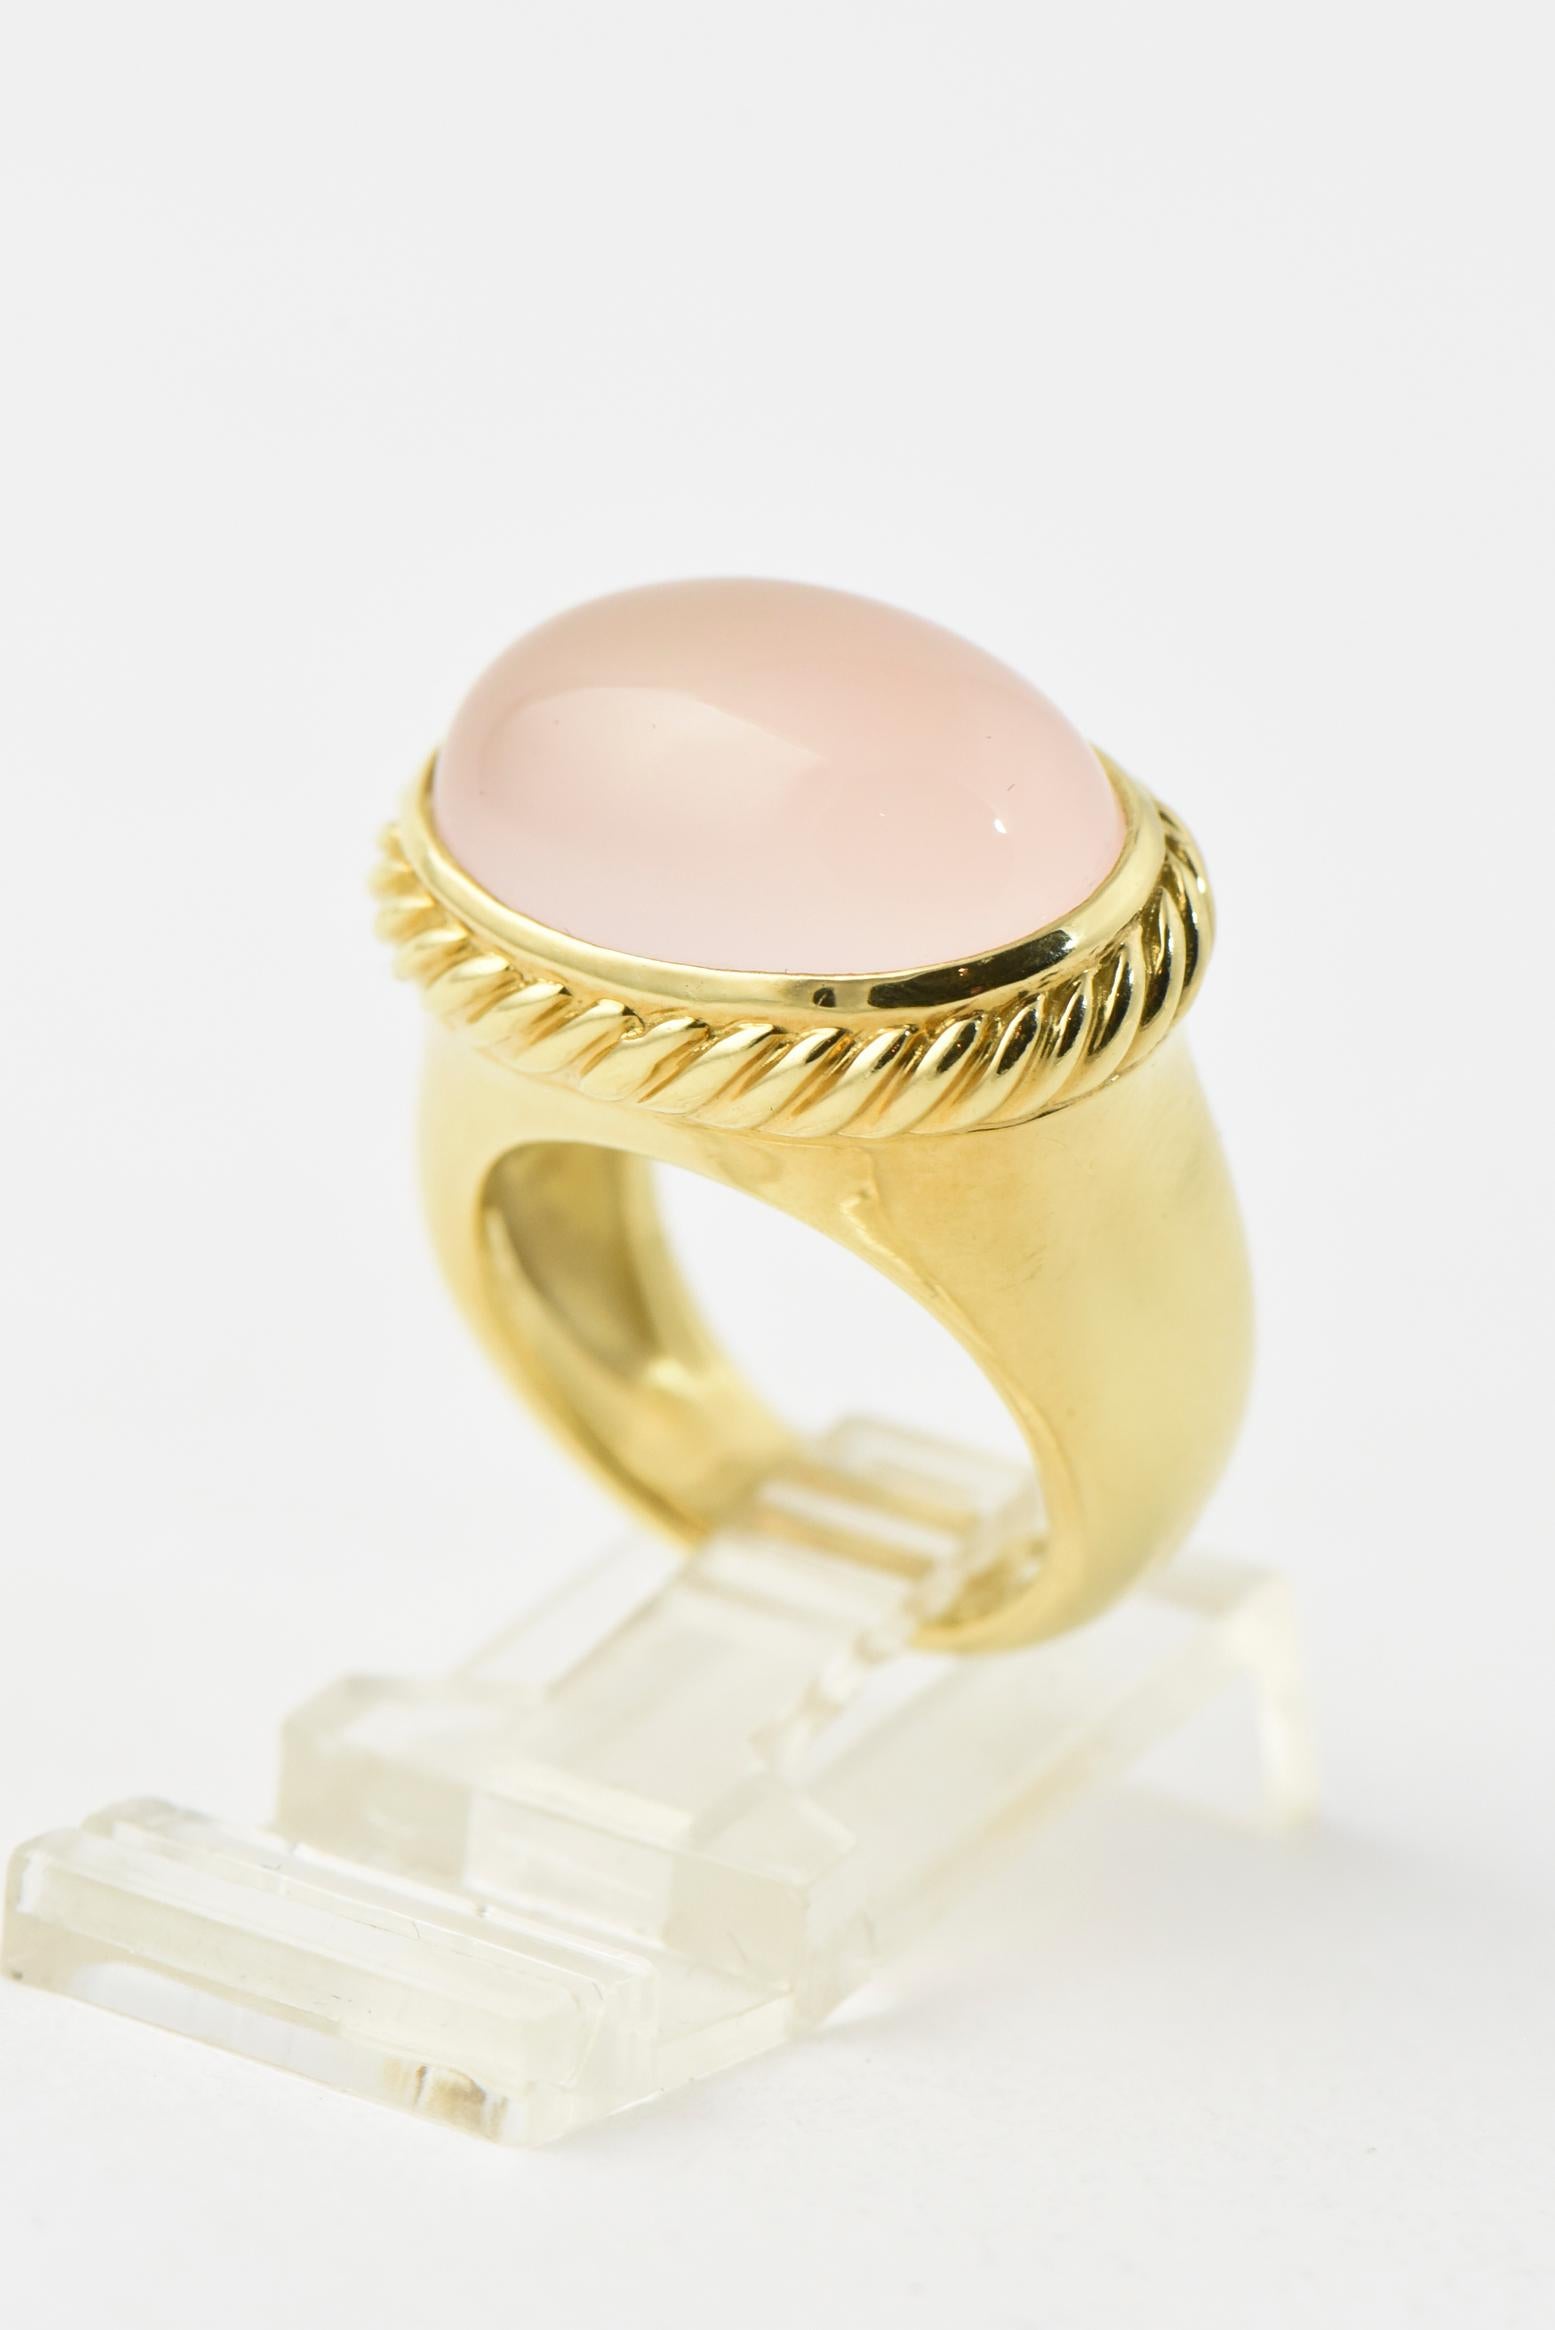 David Yurman 18k yellow gold east - west signature ring with cabochon rose quartz mounted in a cable frame. The band is solid gold with a smooth finish.  Marked 